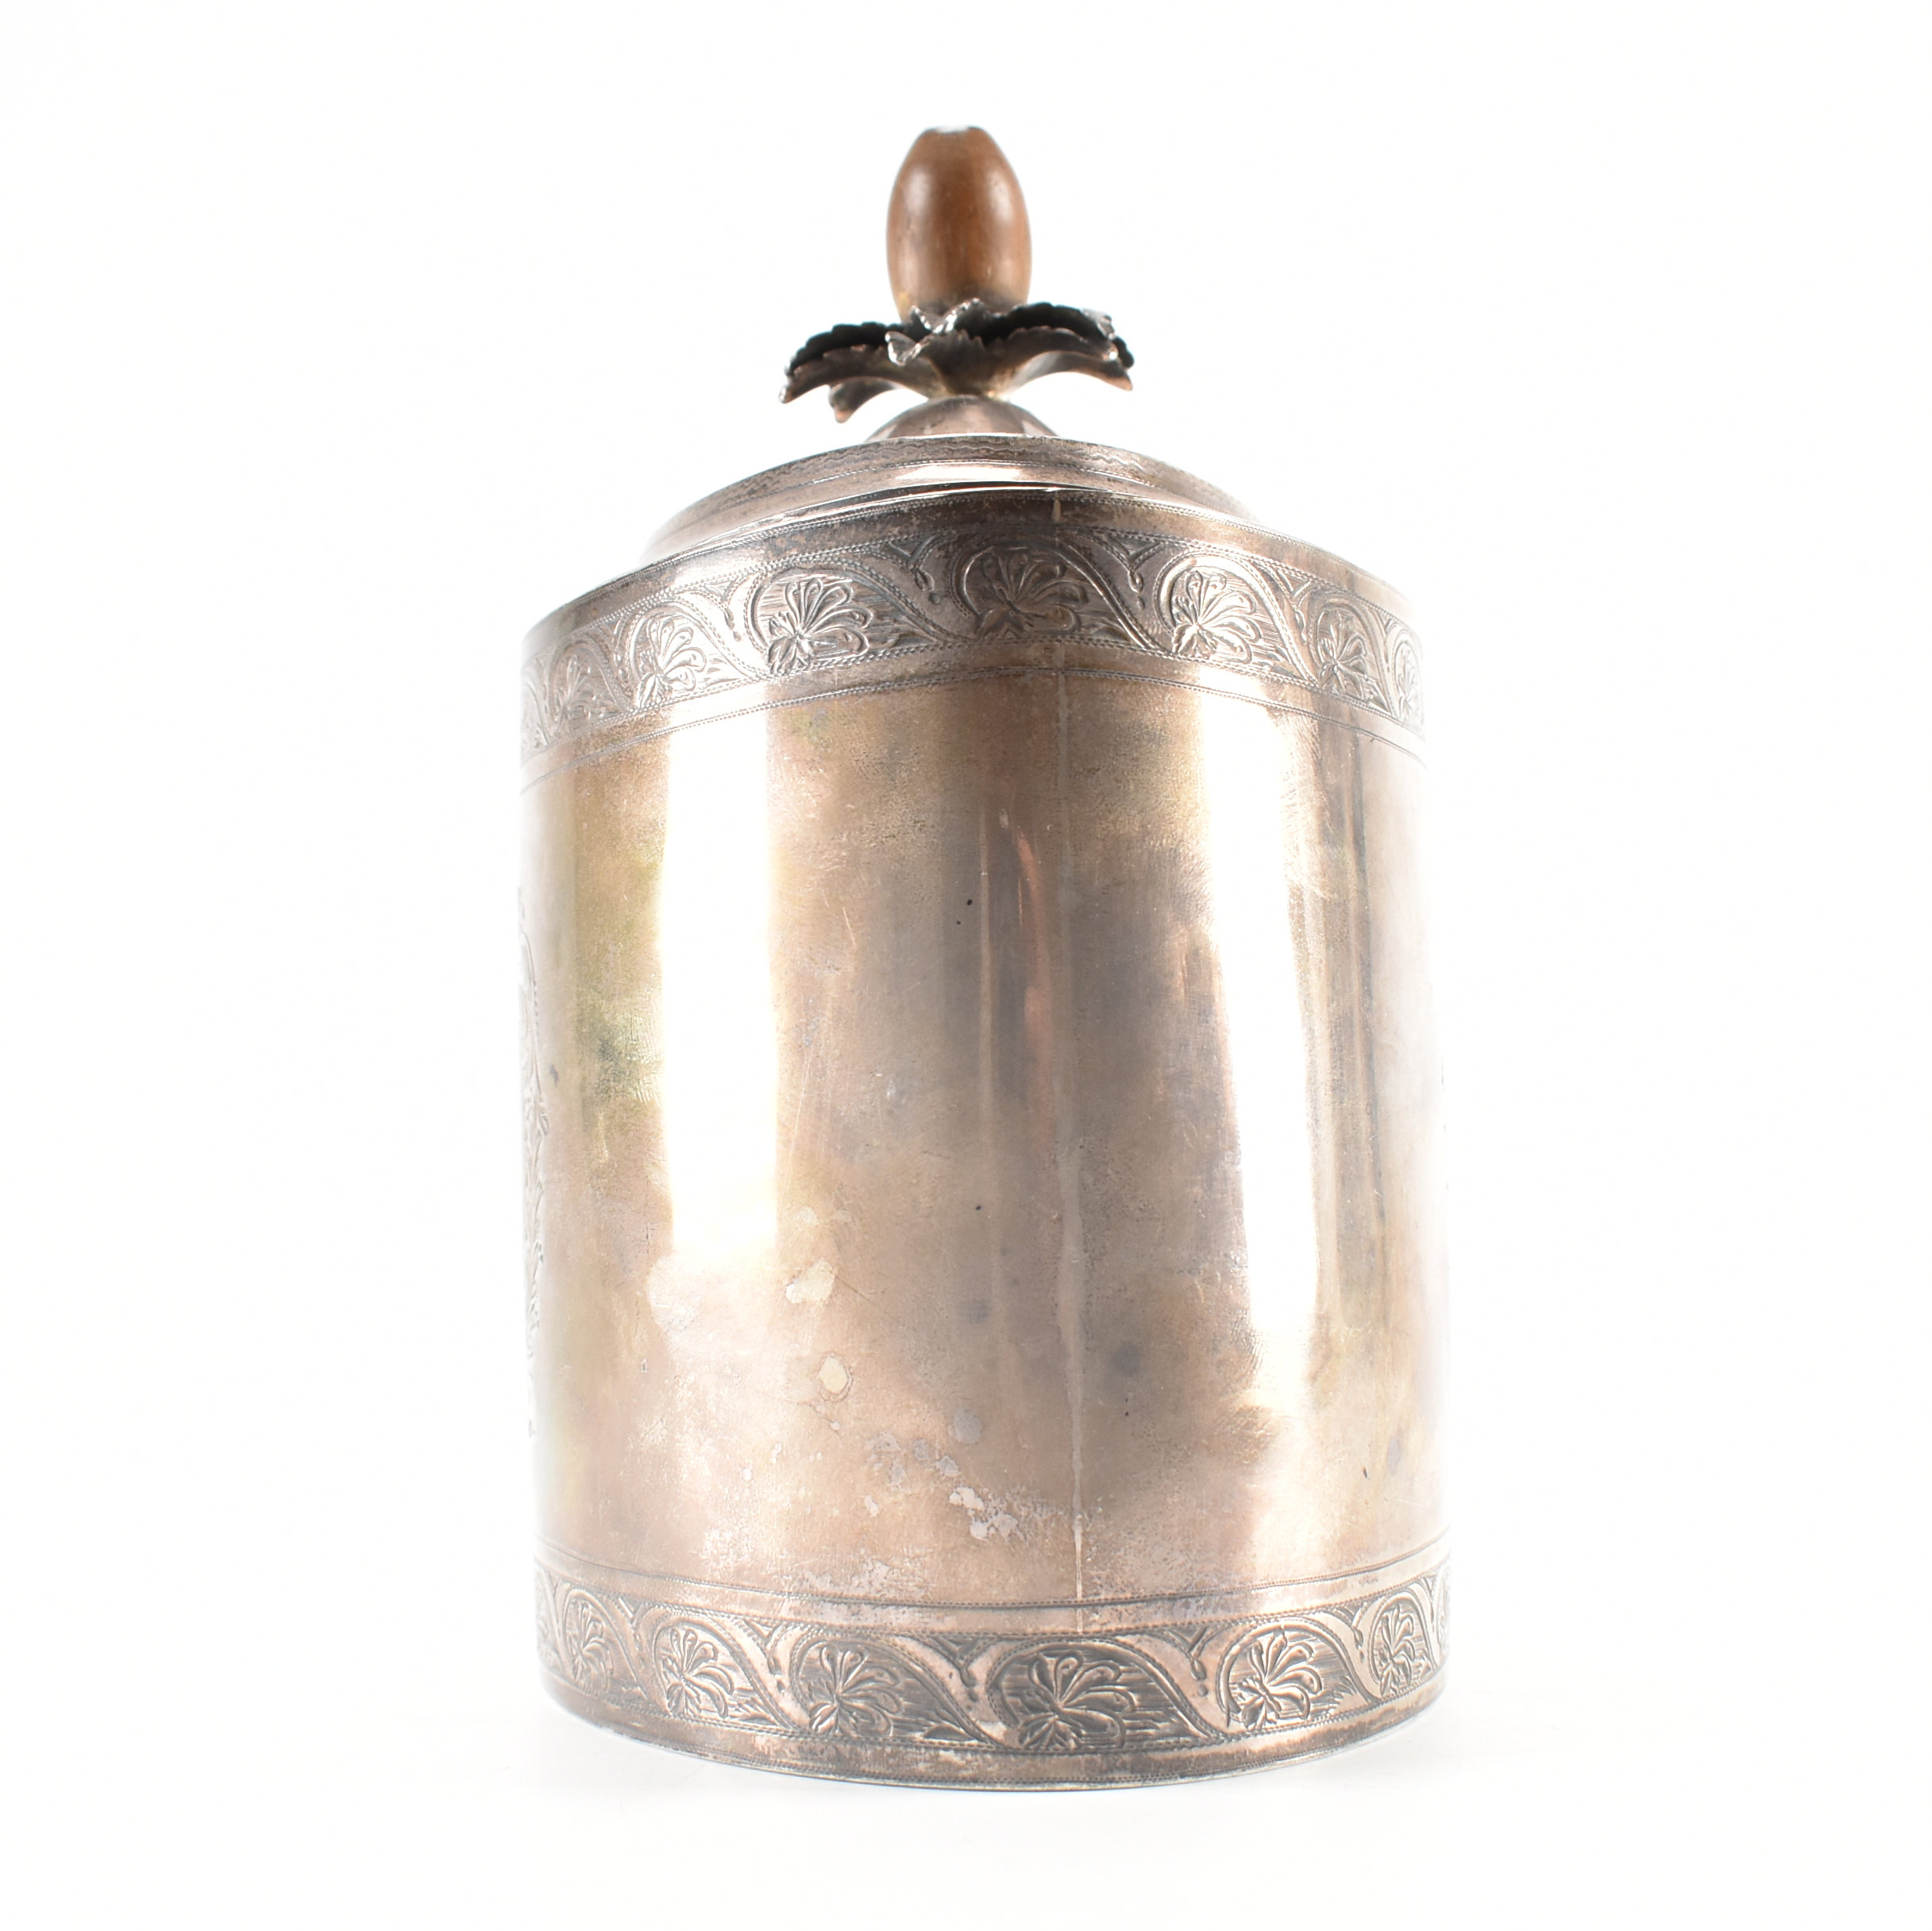 GEORGE III NEO CLASSICAL SILVER HALLMARKED TEA CADDY - Image 4 of 7